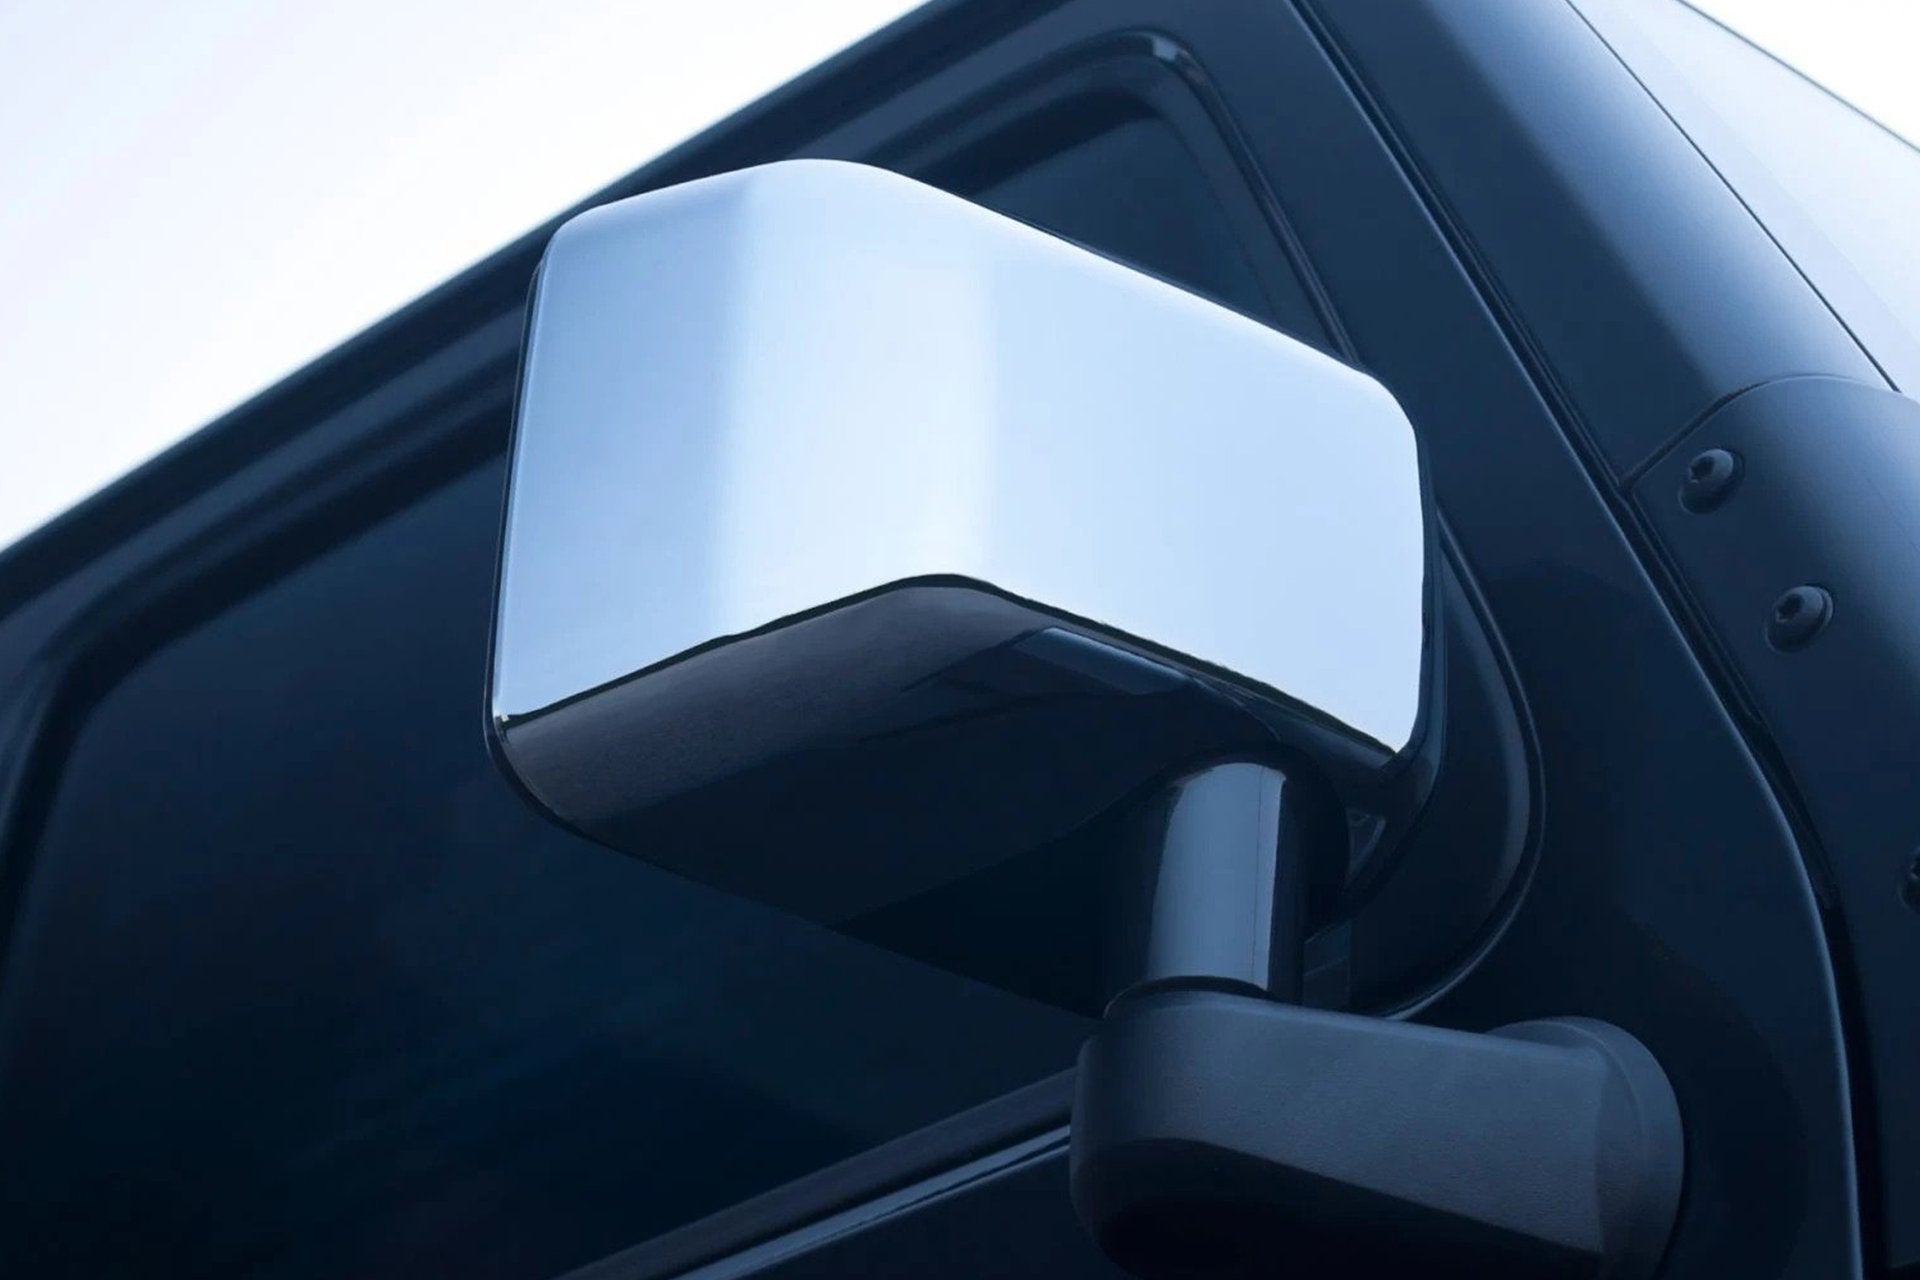 Jeep Wrangler JK (2007-2018) CHROME WING MIRROR COVERS